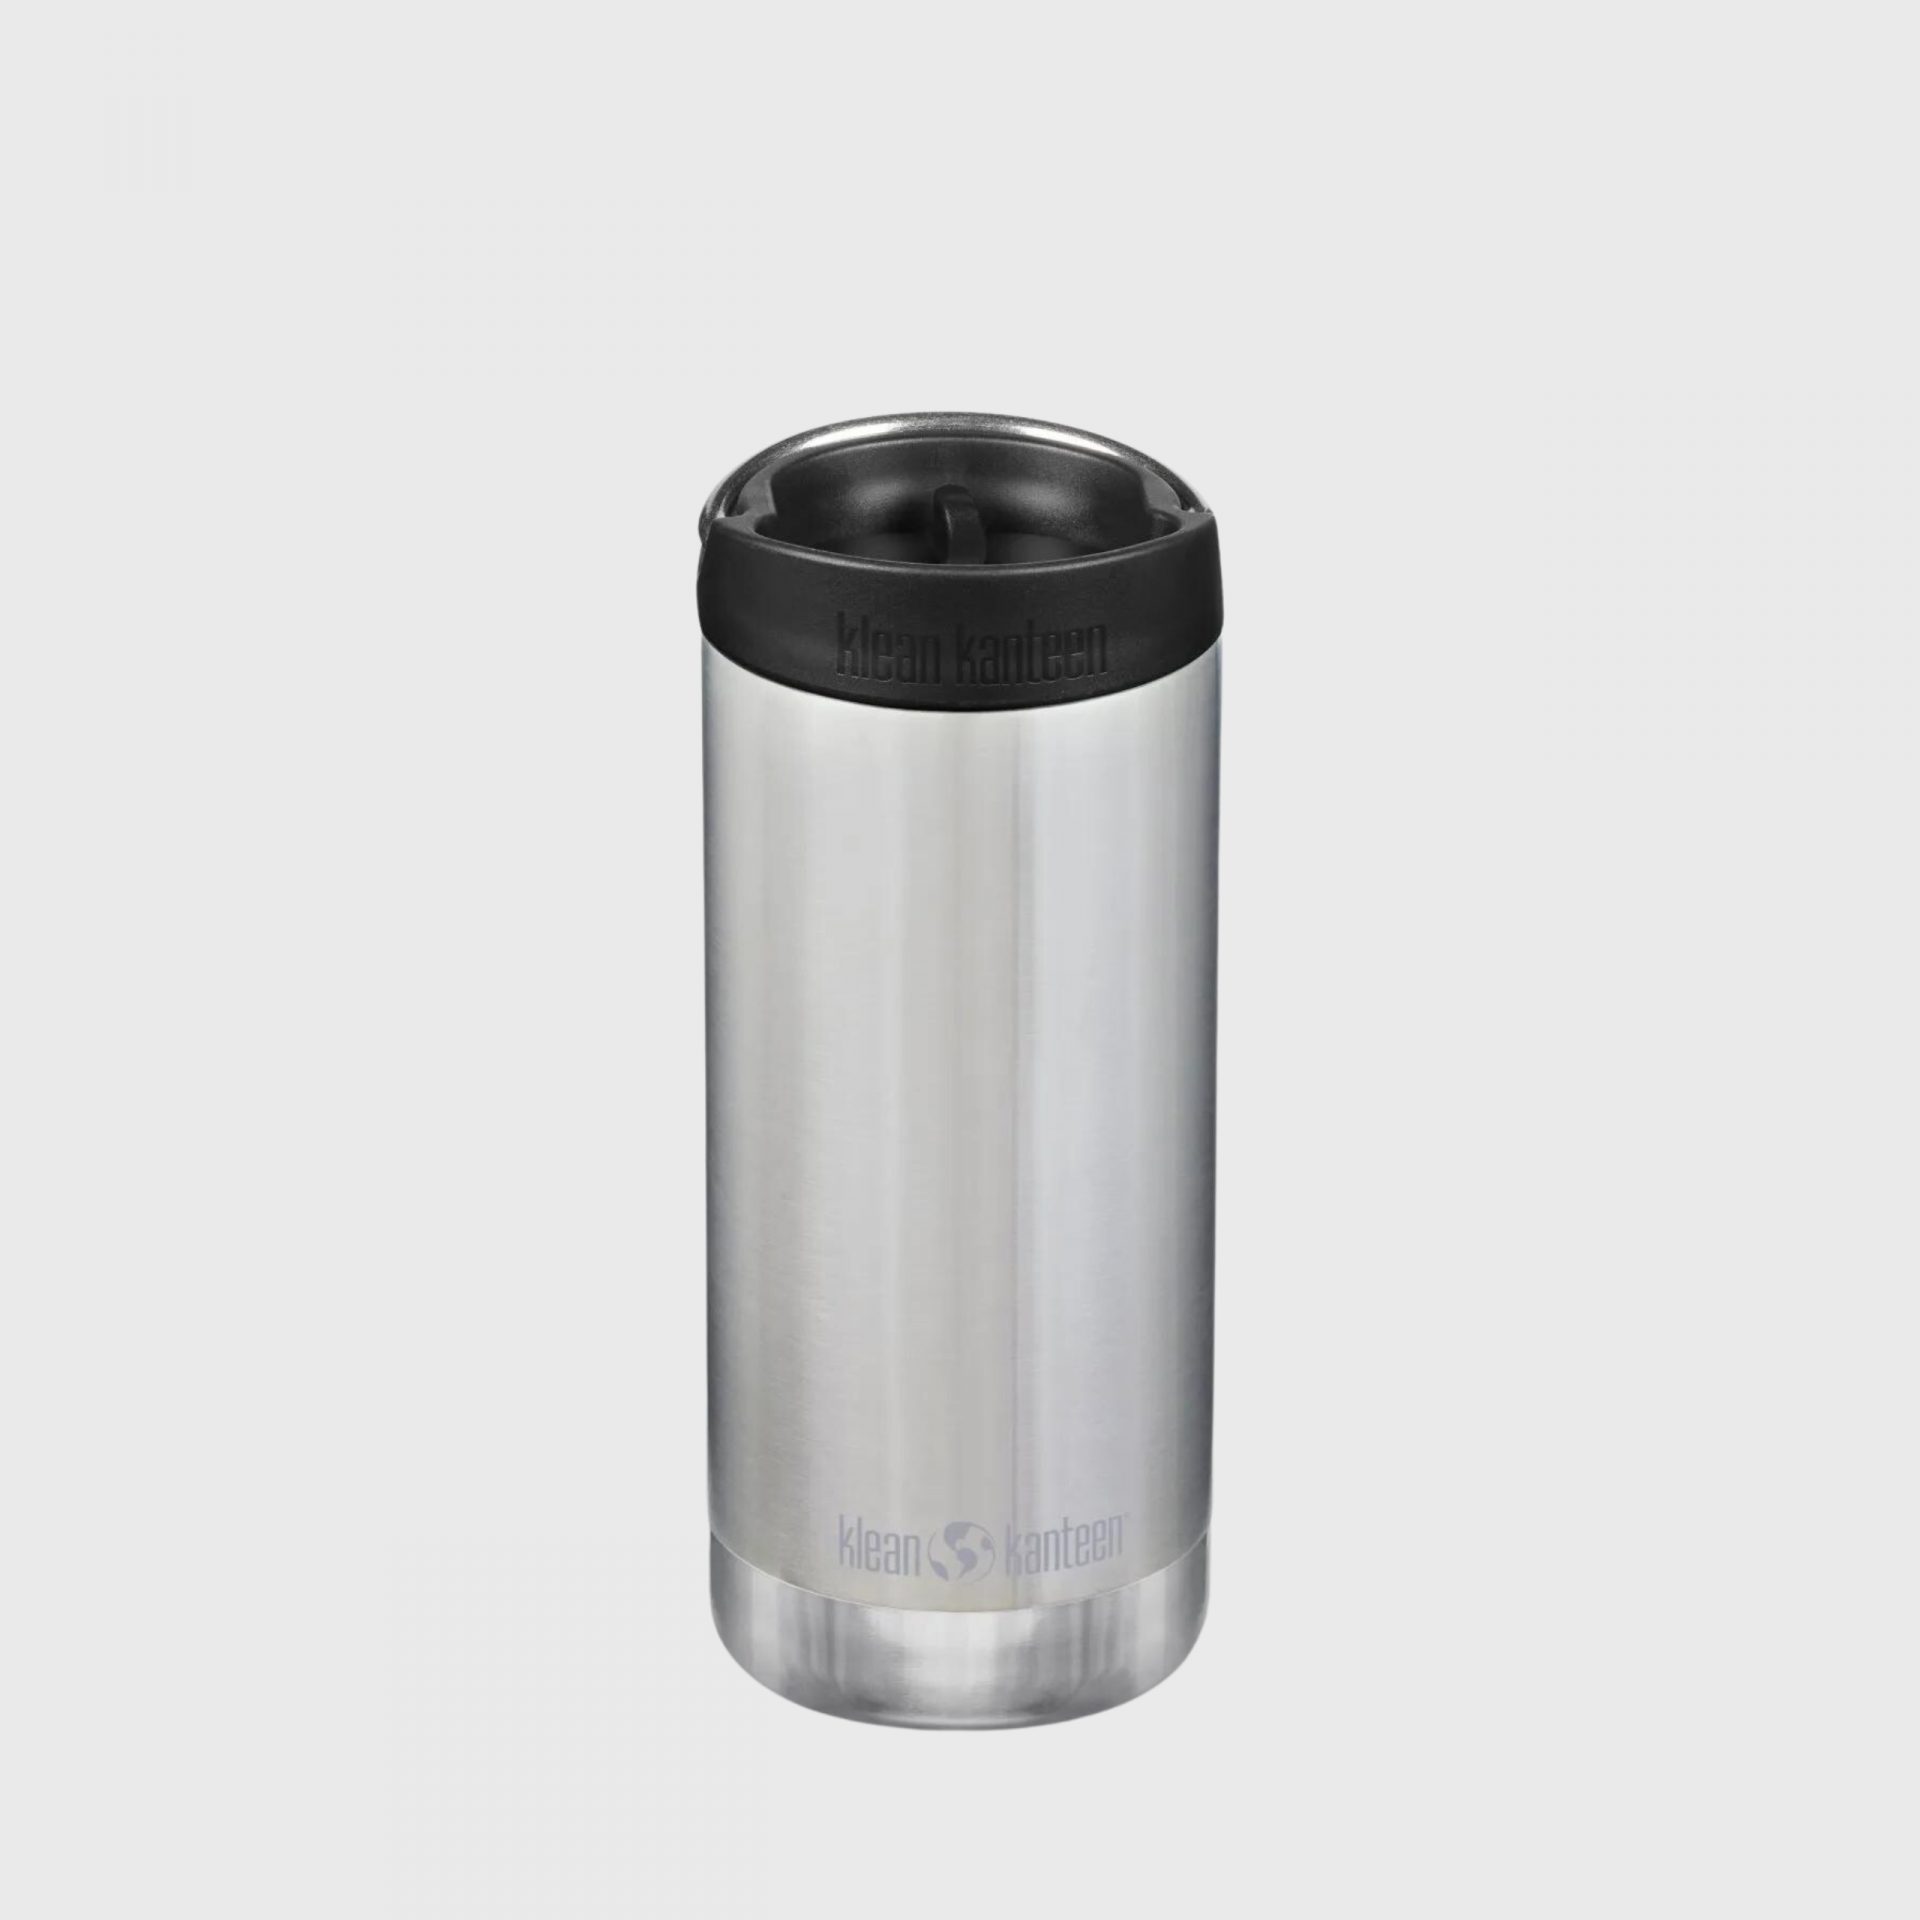 Klean Kanteen Singapore Sustainable Corporate Gifts 12 oz TKWide Insulated Coffee Tumbler with Café Cap Brushed Stainless